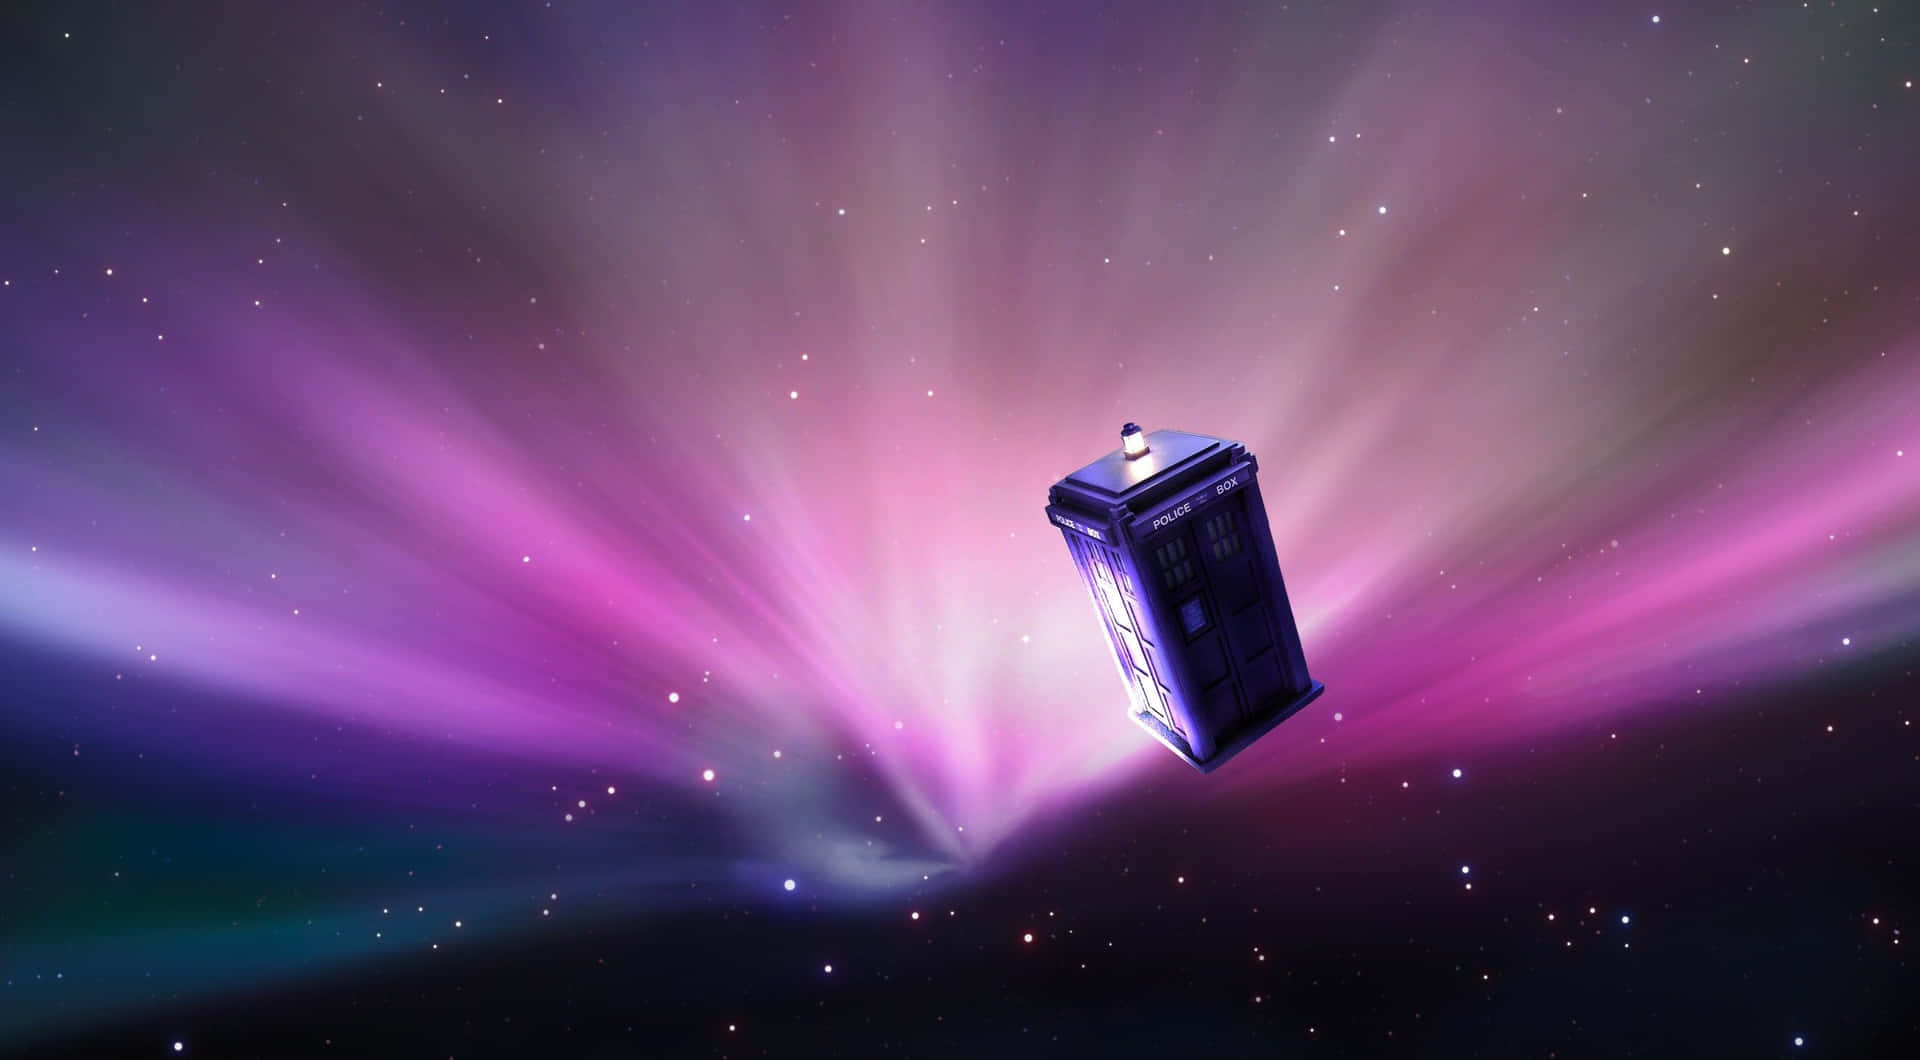 The doors may look small, but the adventures are never-ending inside the Tardis Wallpaper